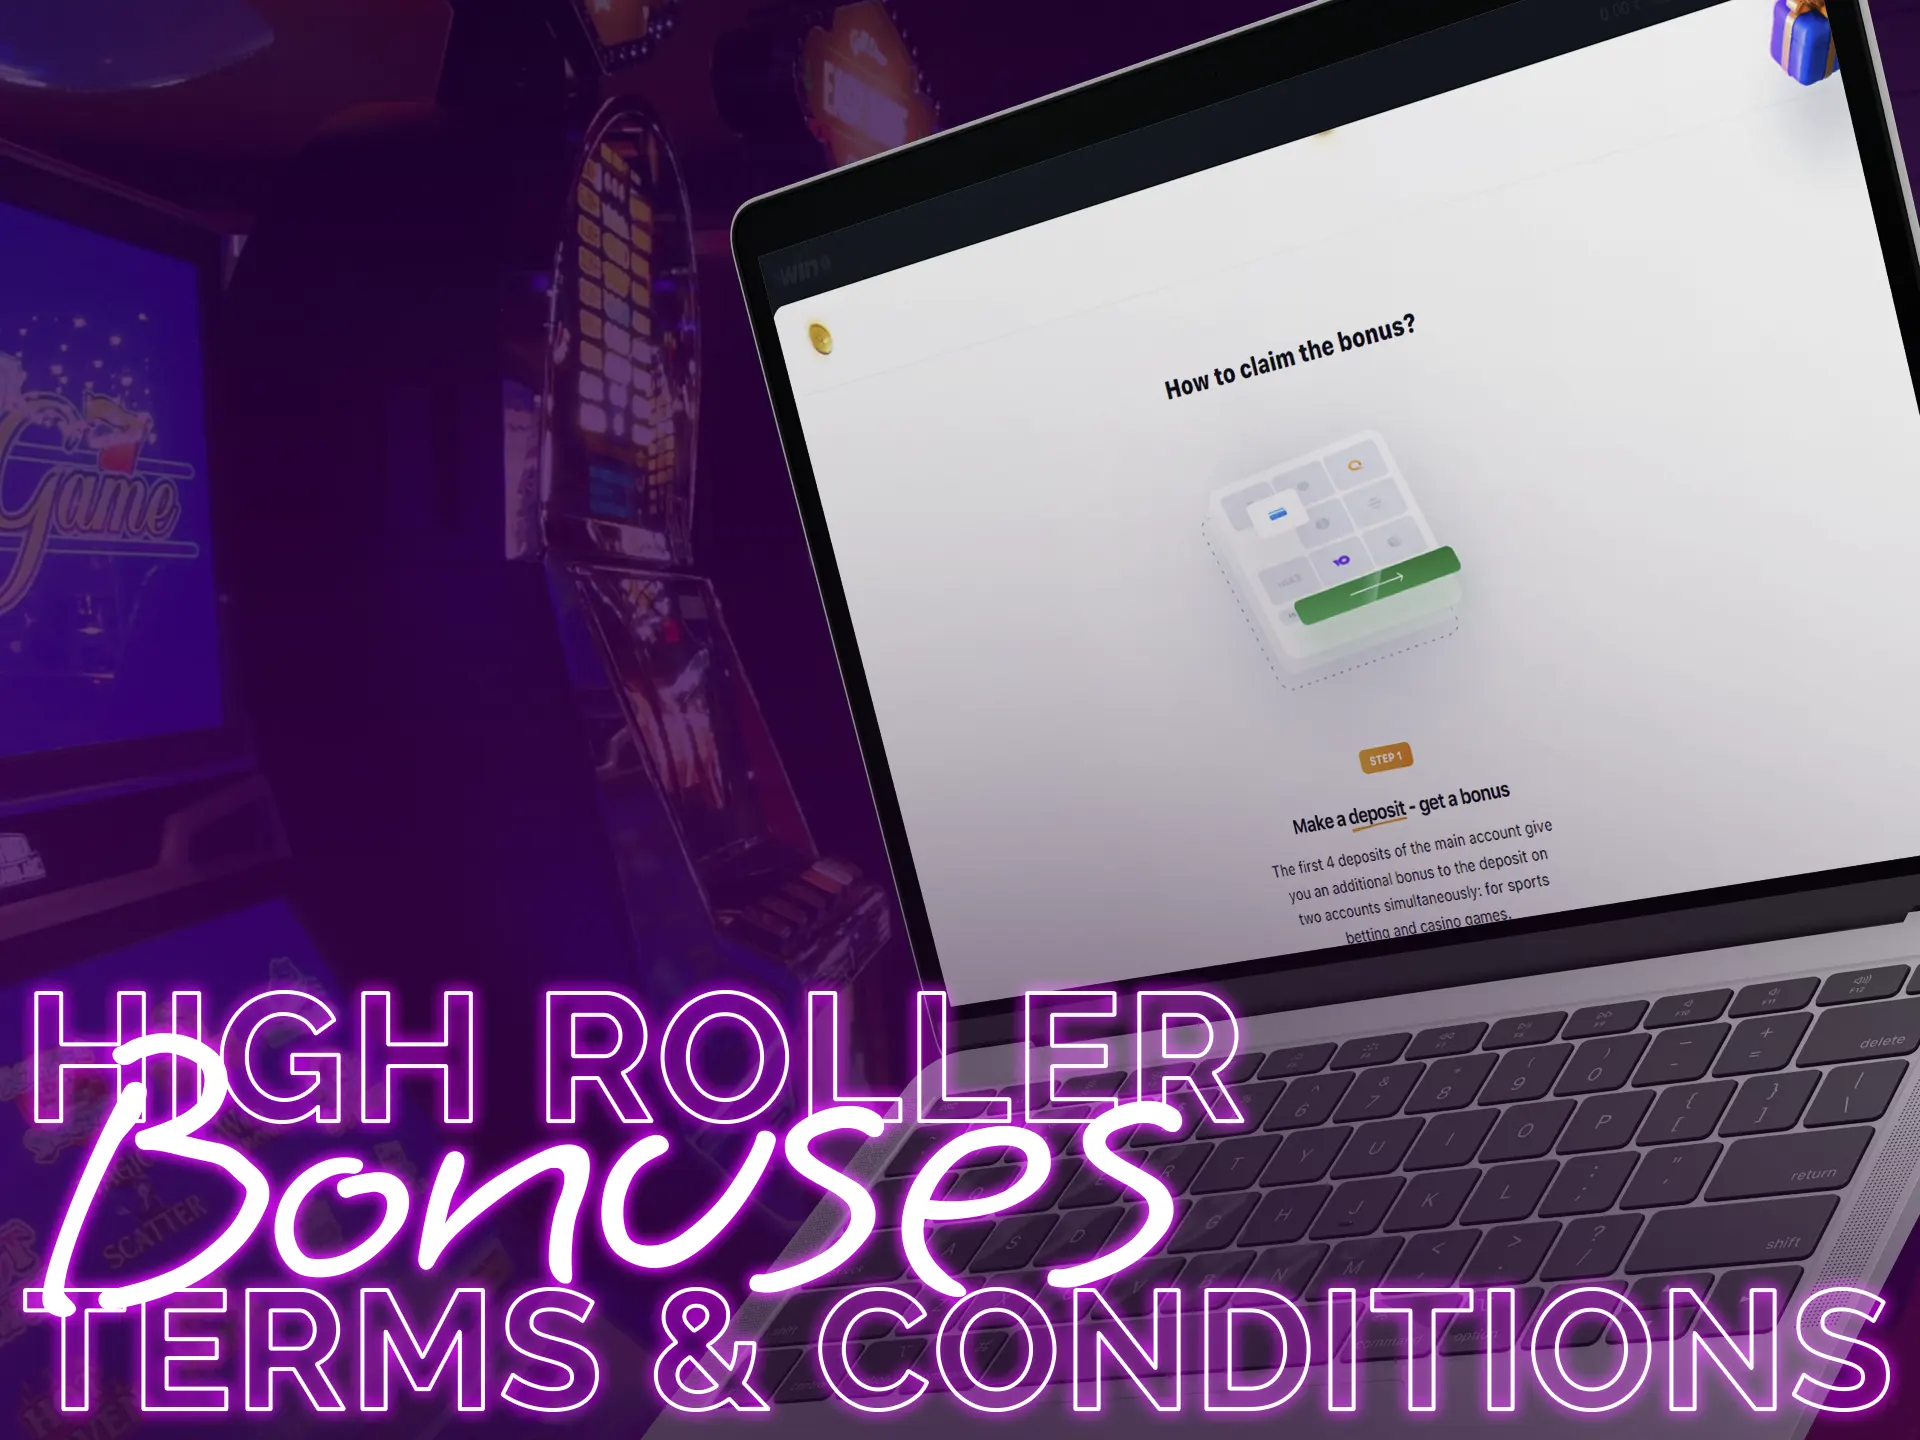 Check terms and conditions of high-roller bonuses.